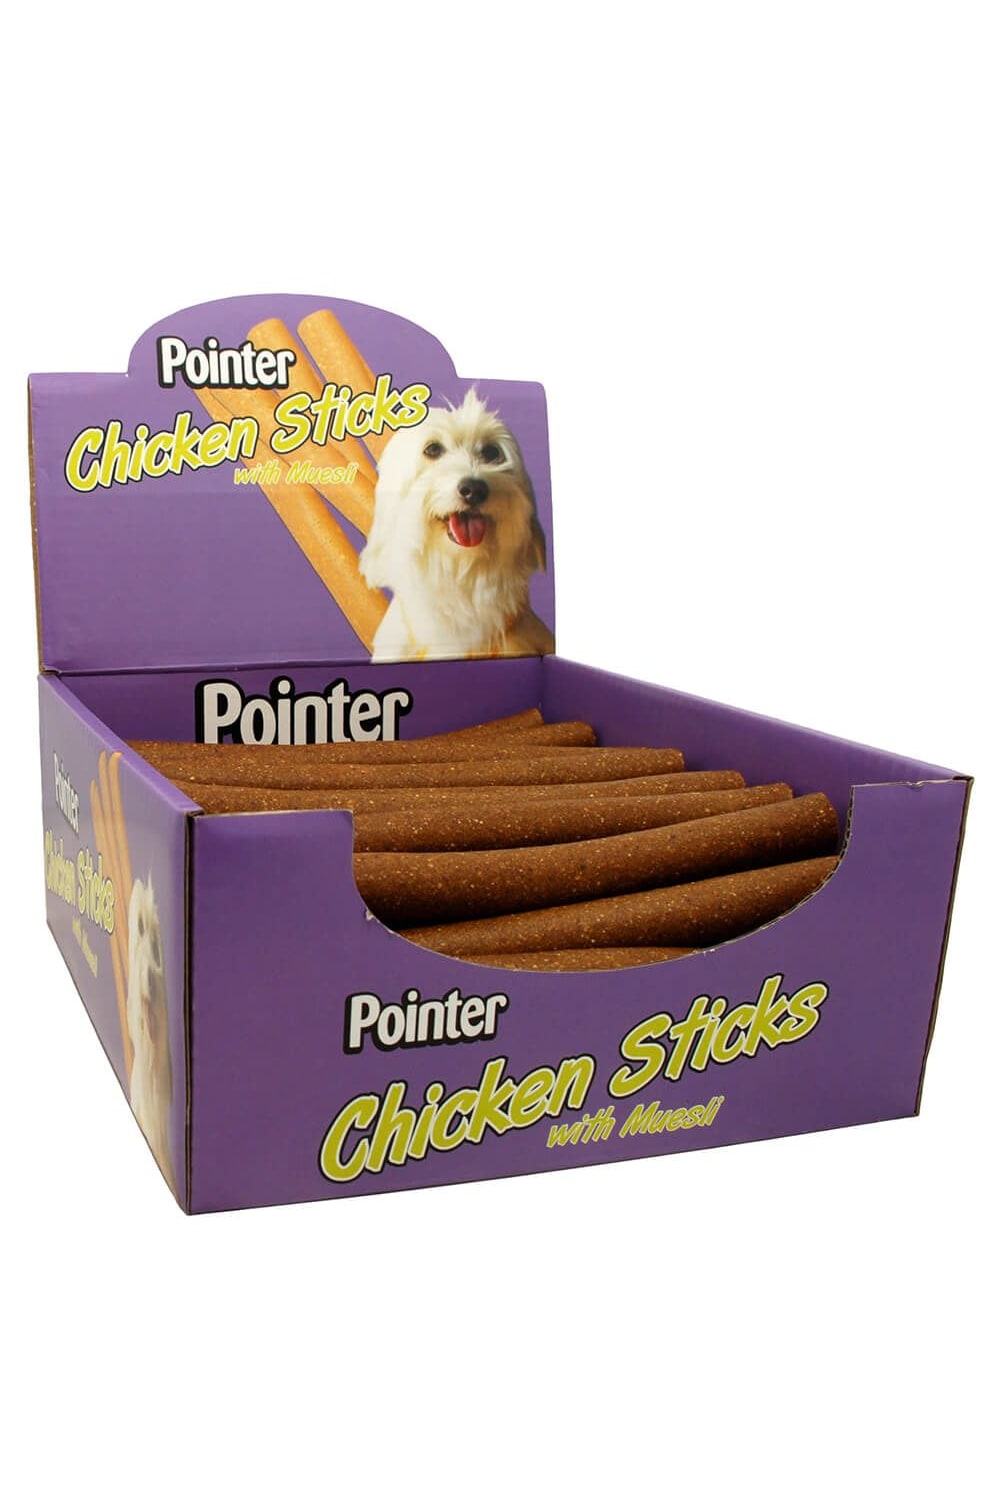 Pointer Sticks Chicken Flavored Dogs Snacks 50 Pack (May Vary) (One Size)